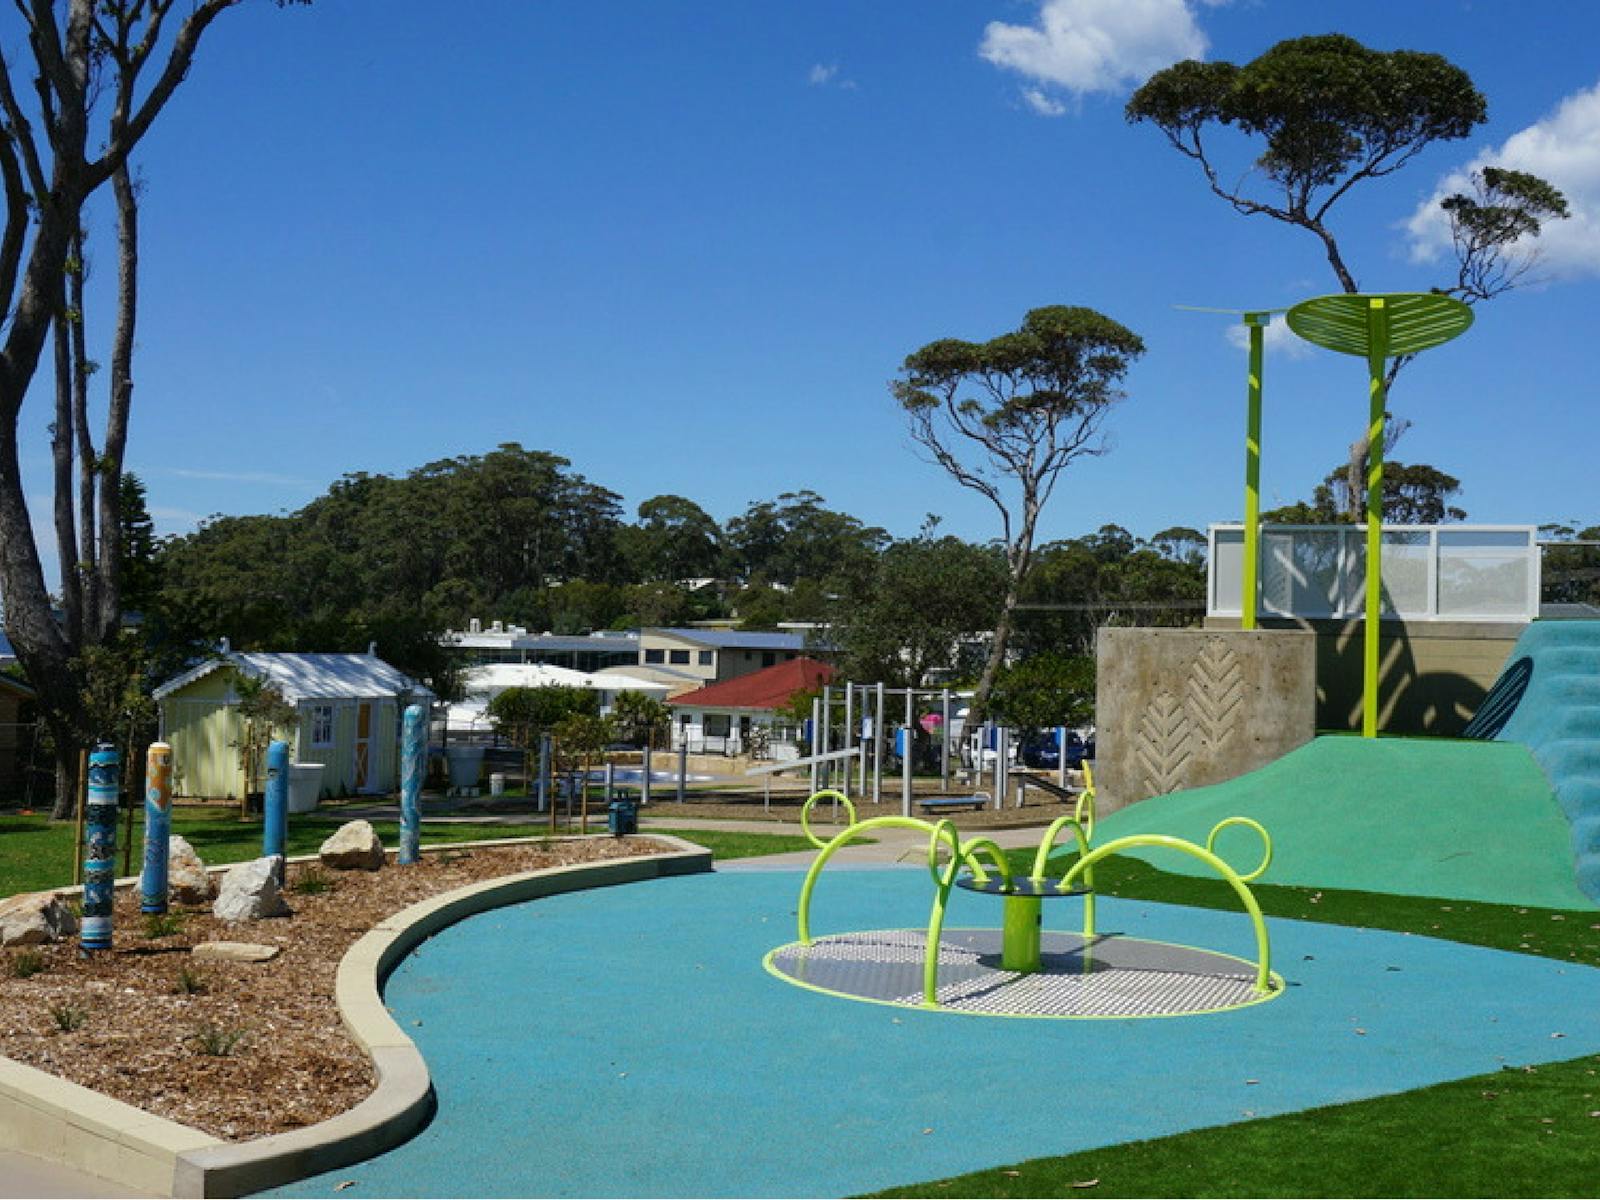 Livvi's Place, accessible playground